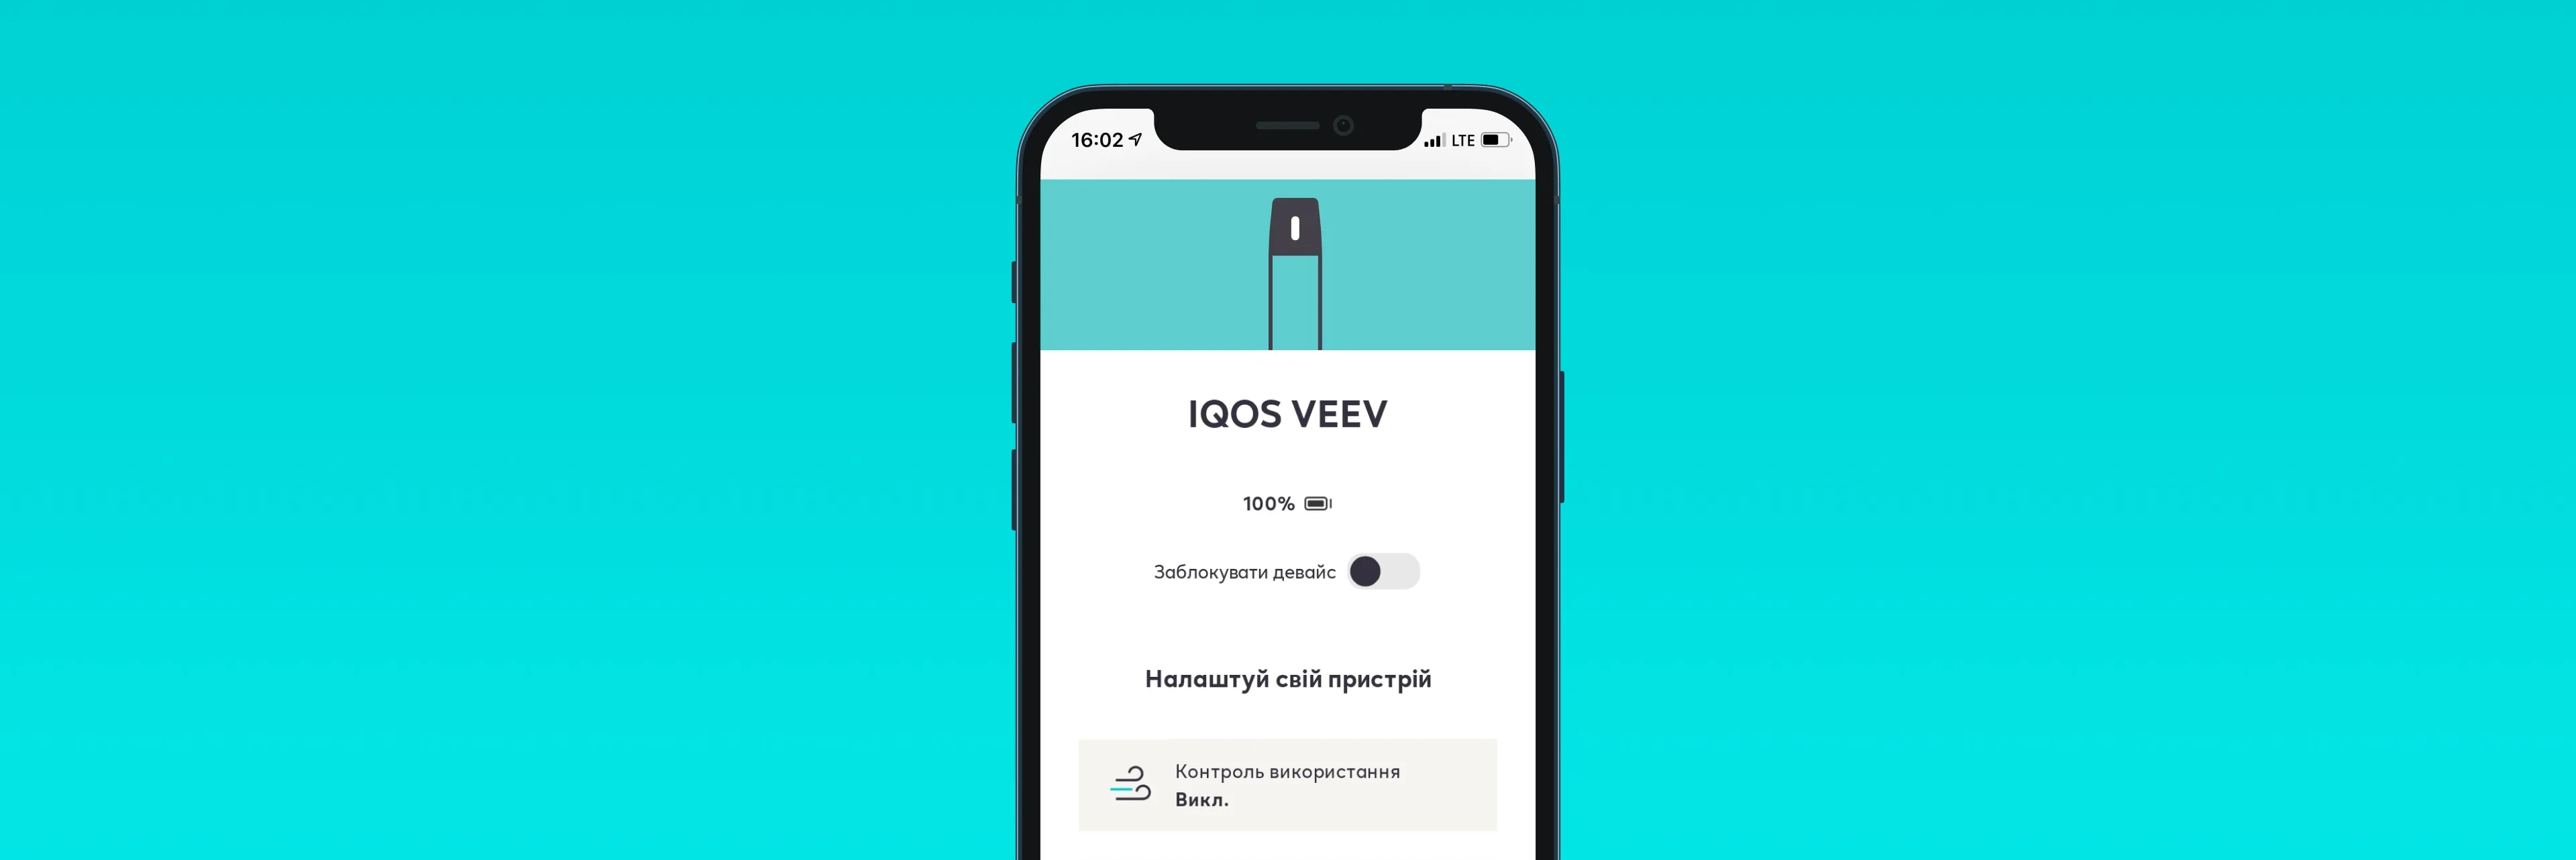 iqos-app-new-functions-for-veev